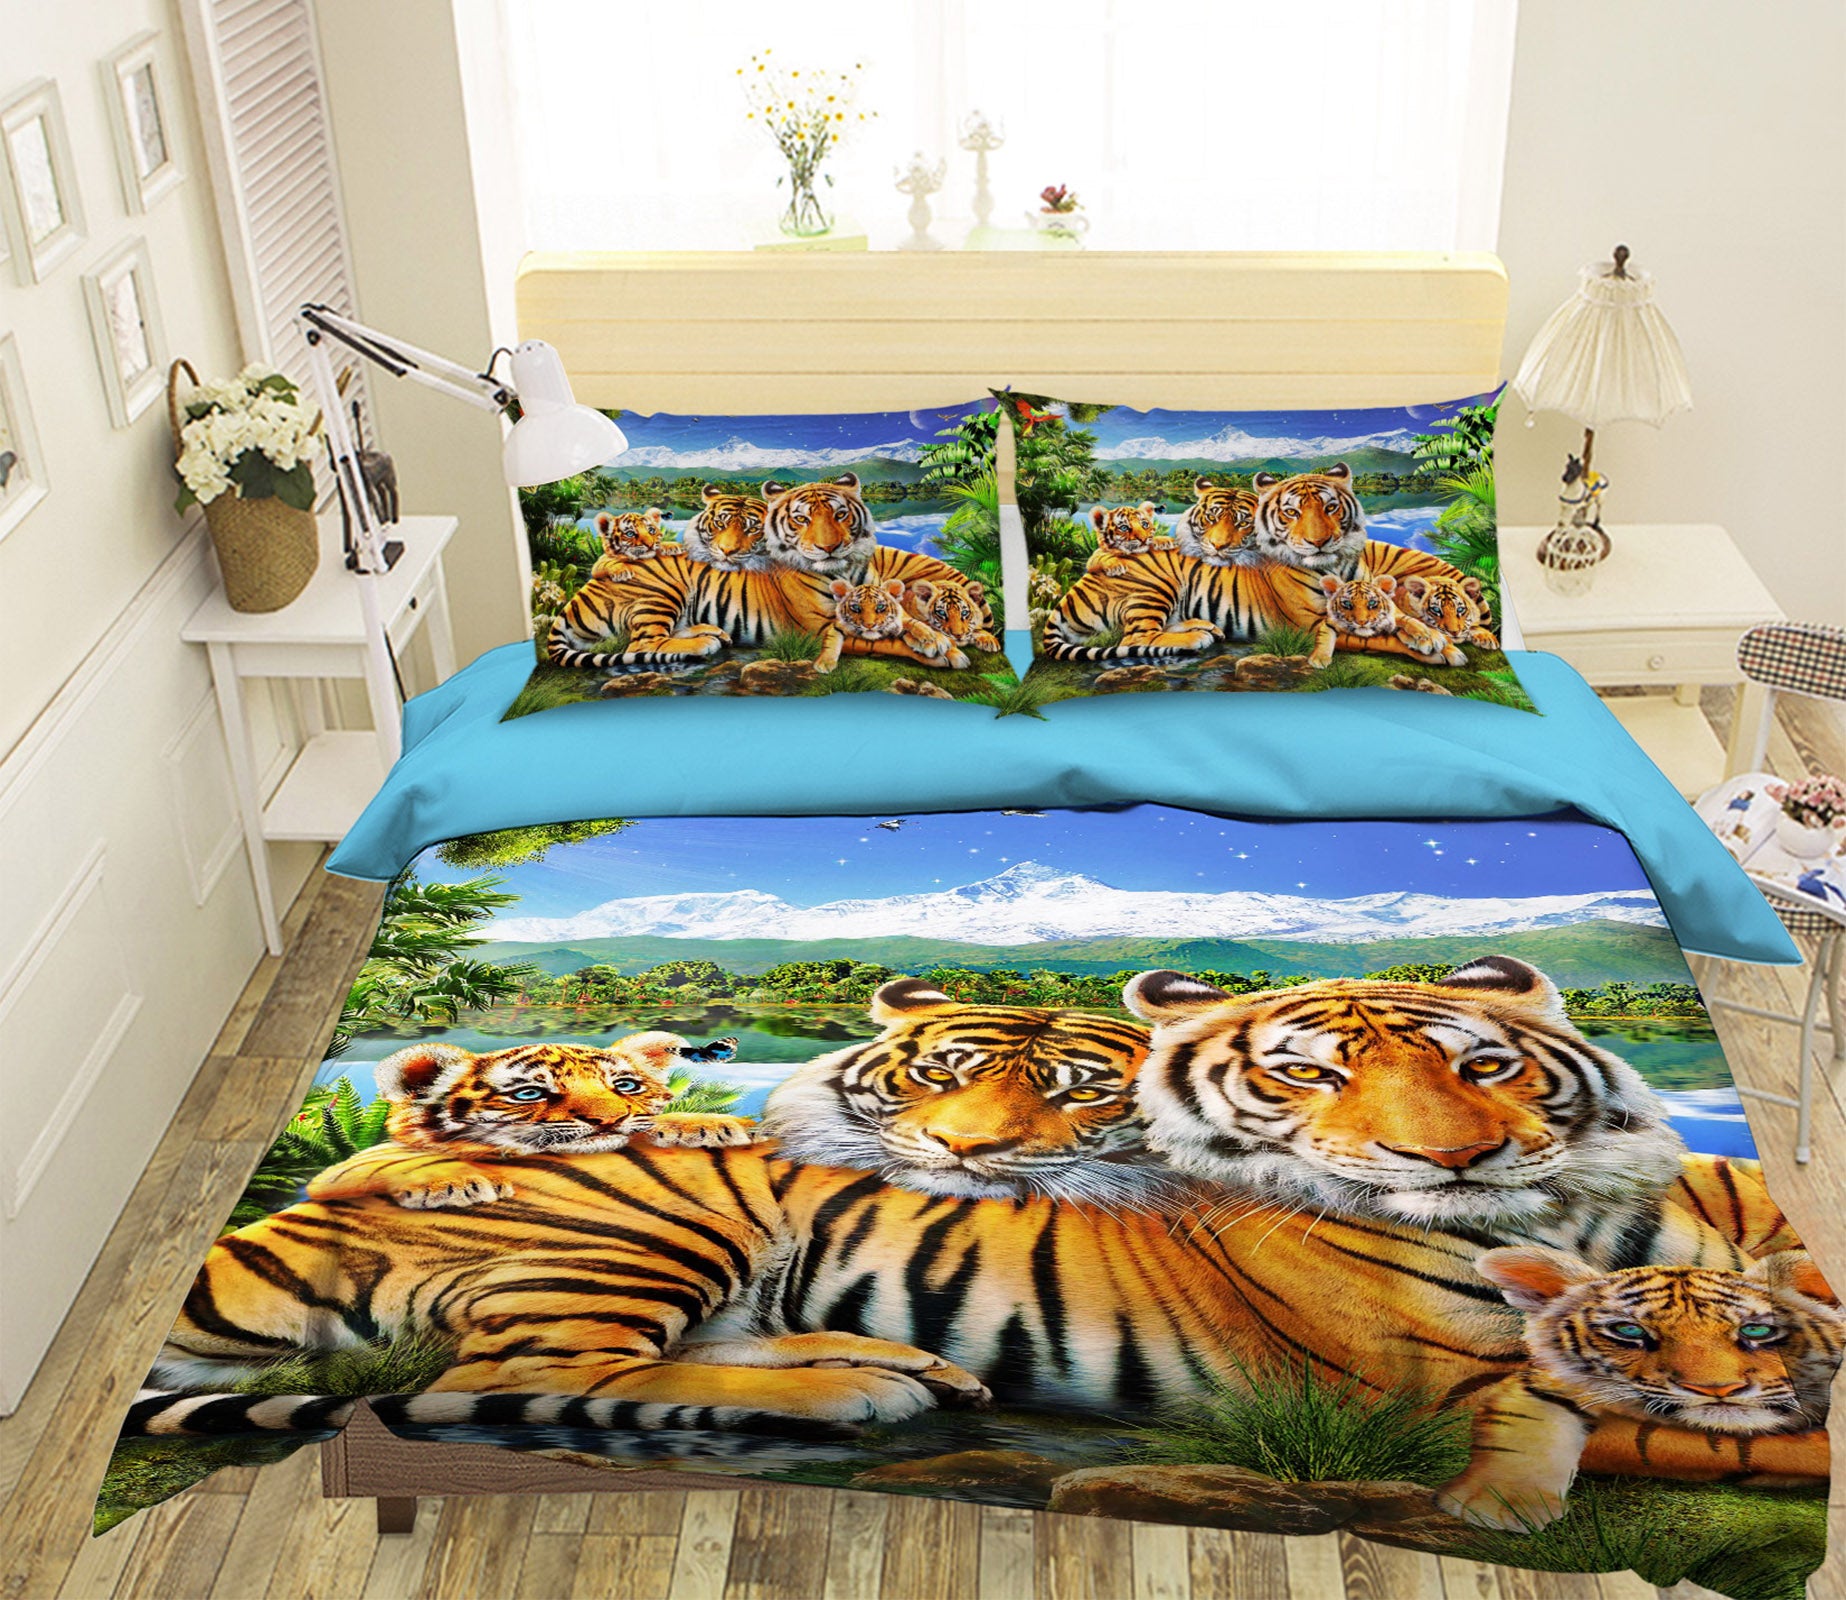 3D Loving Tigers 2041 Adrian Chesterman Bedding Bed Pillowcases Quilt